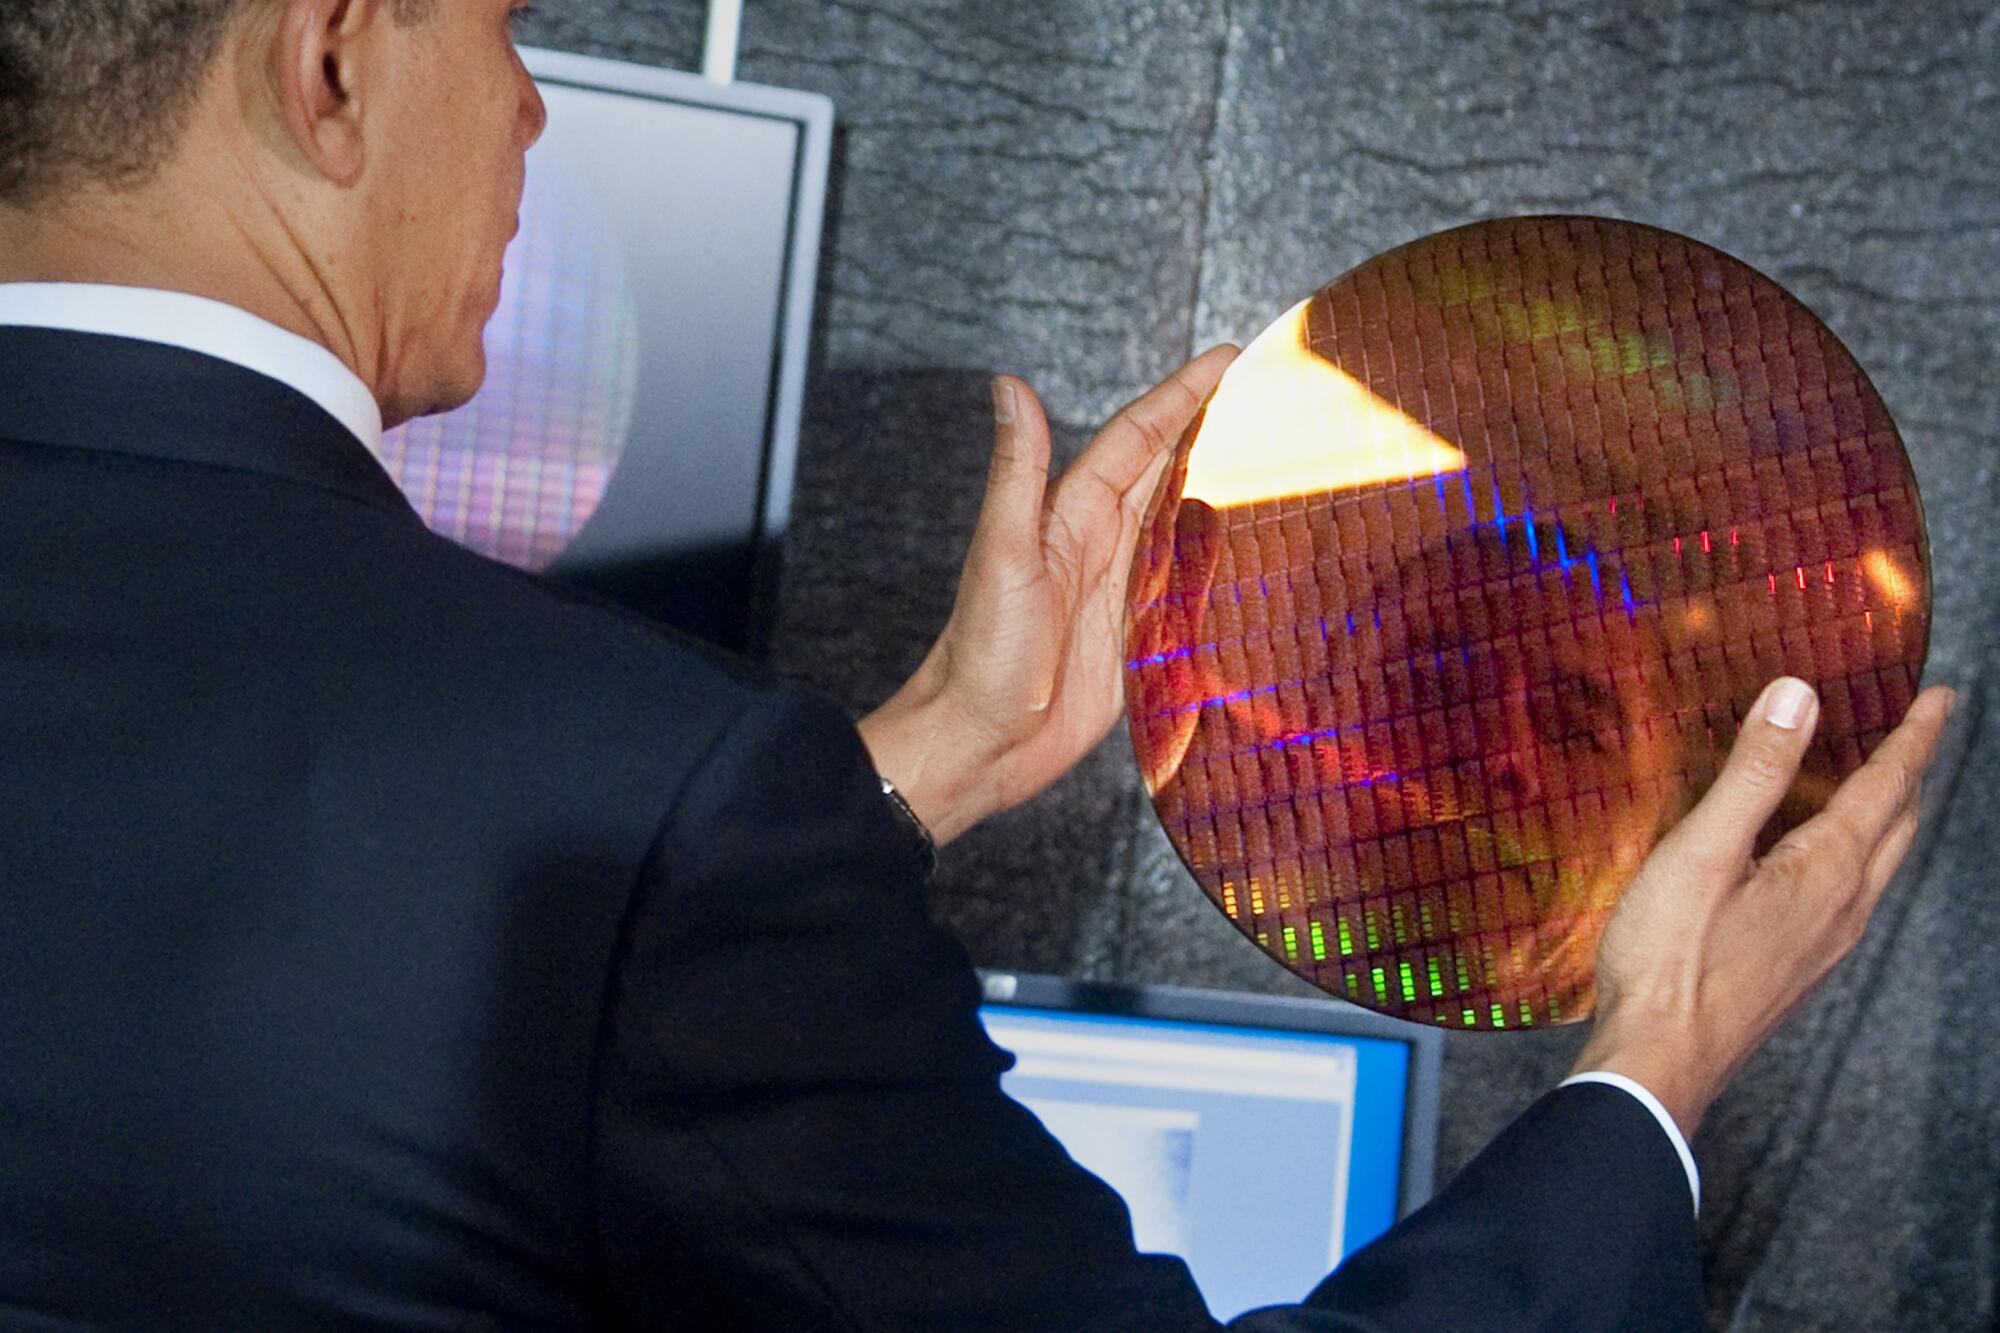 A close shot of President Obama holding an iridescent object the size and shape of a dinner plate, which reflects his face